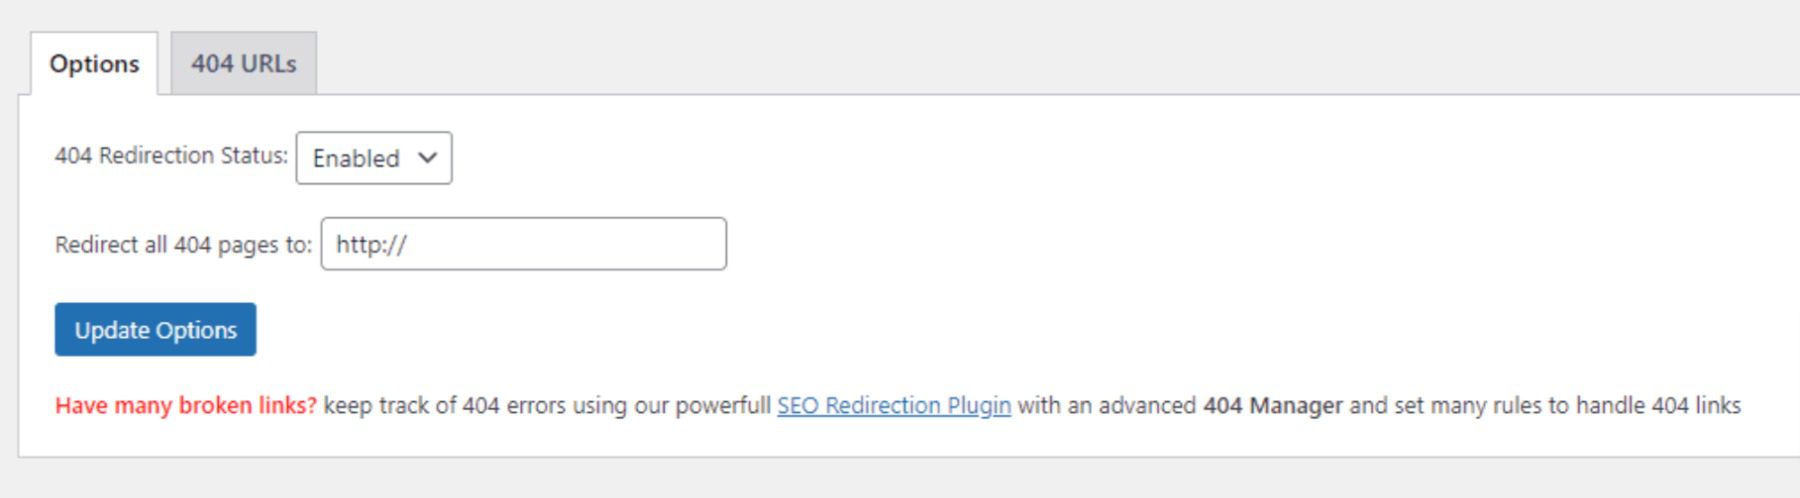 Setting up a redirect rule for 404 errors